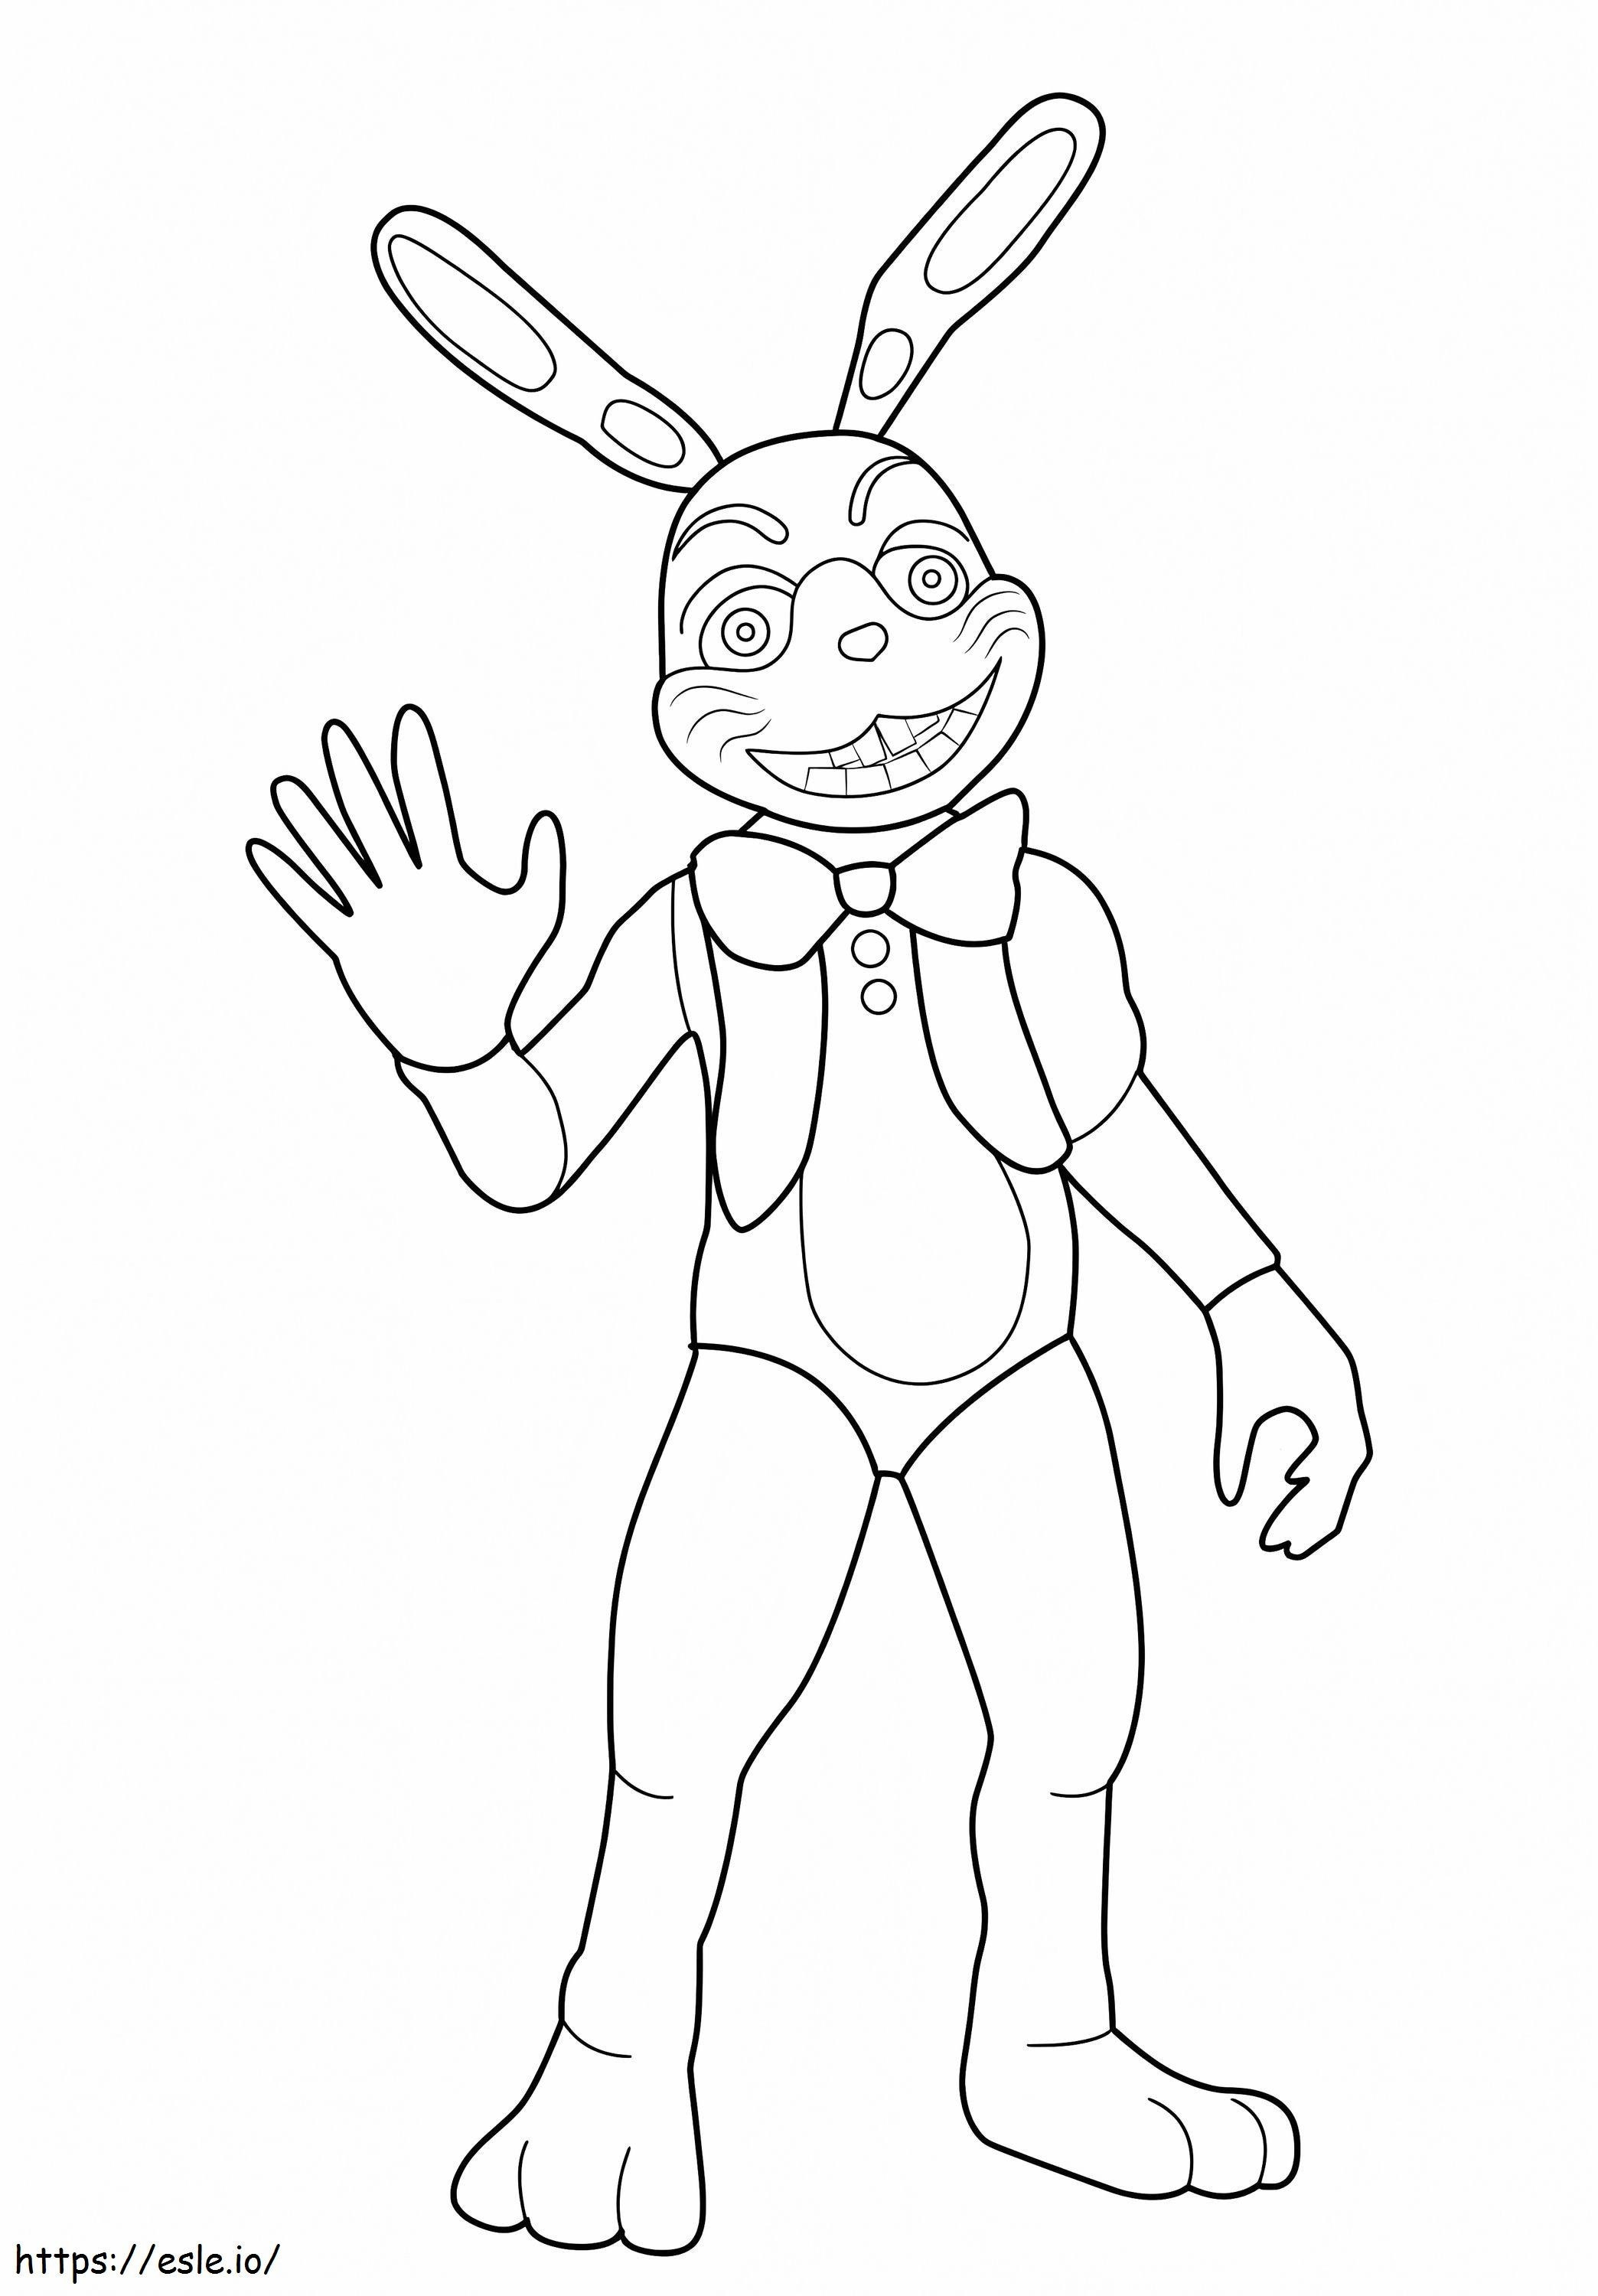 Glitchtrap FNAF coloring page